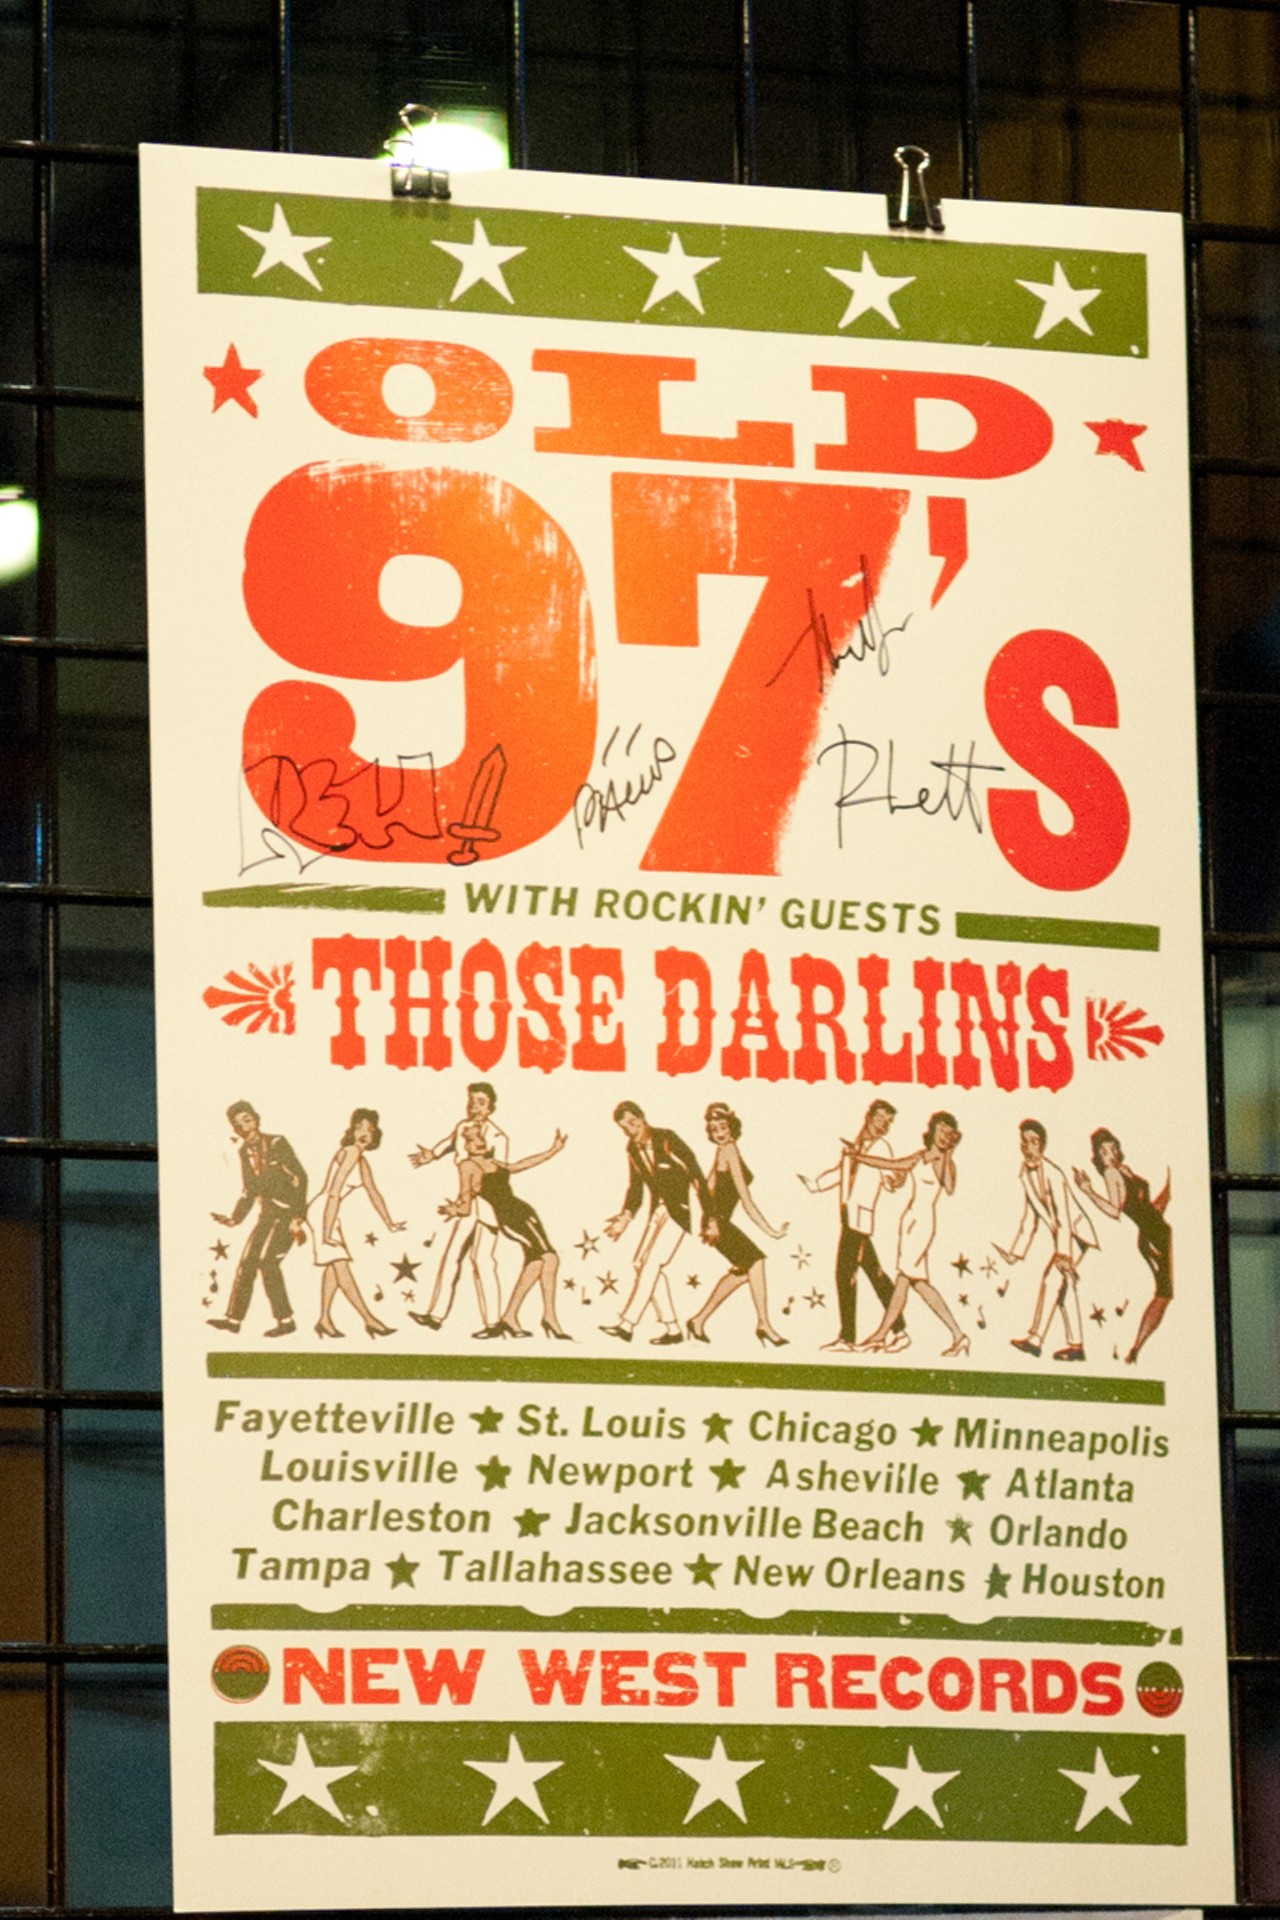 Autographed Old 97's poster in Suite 100.